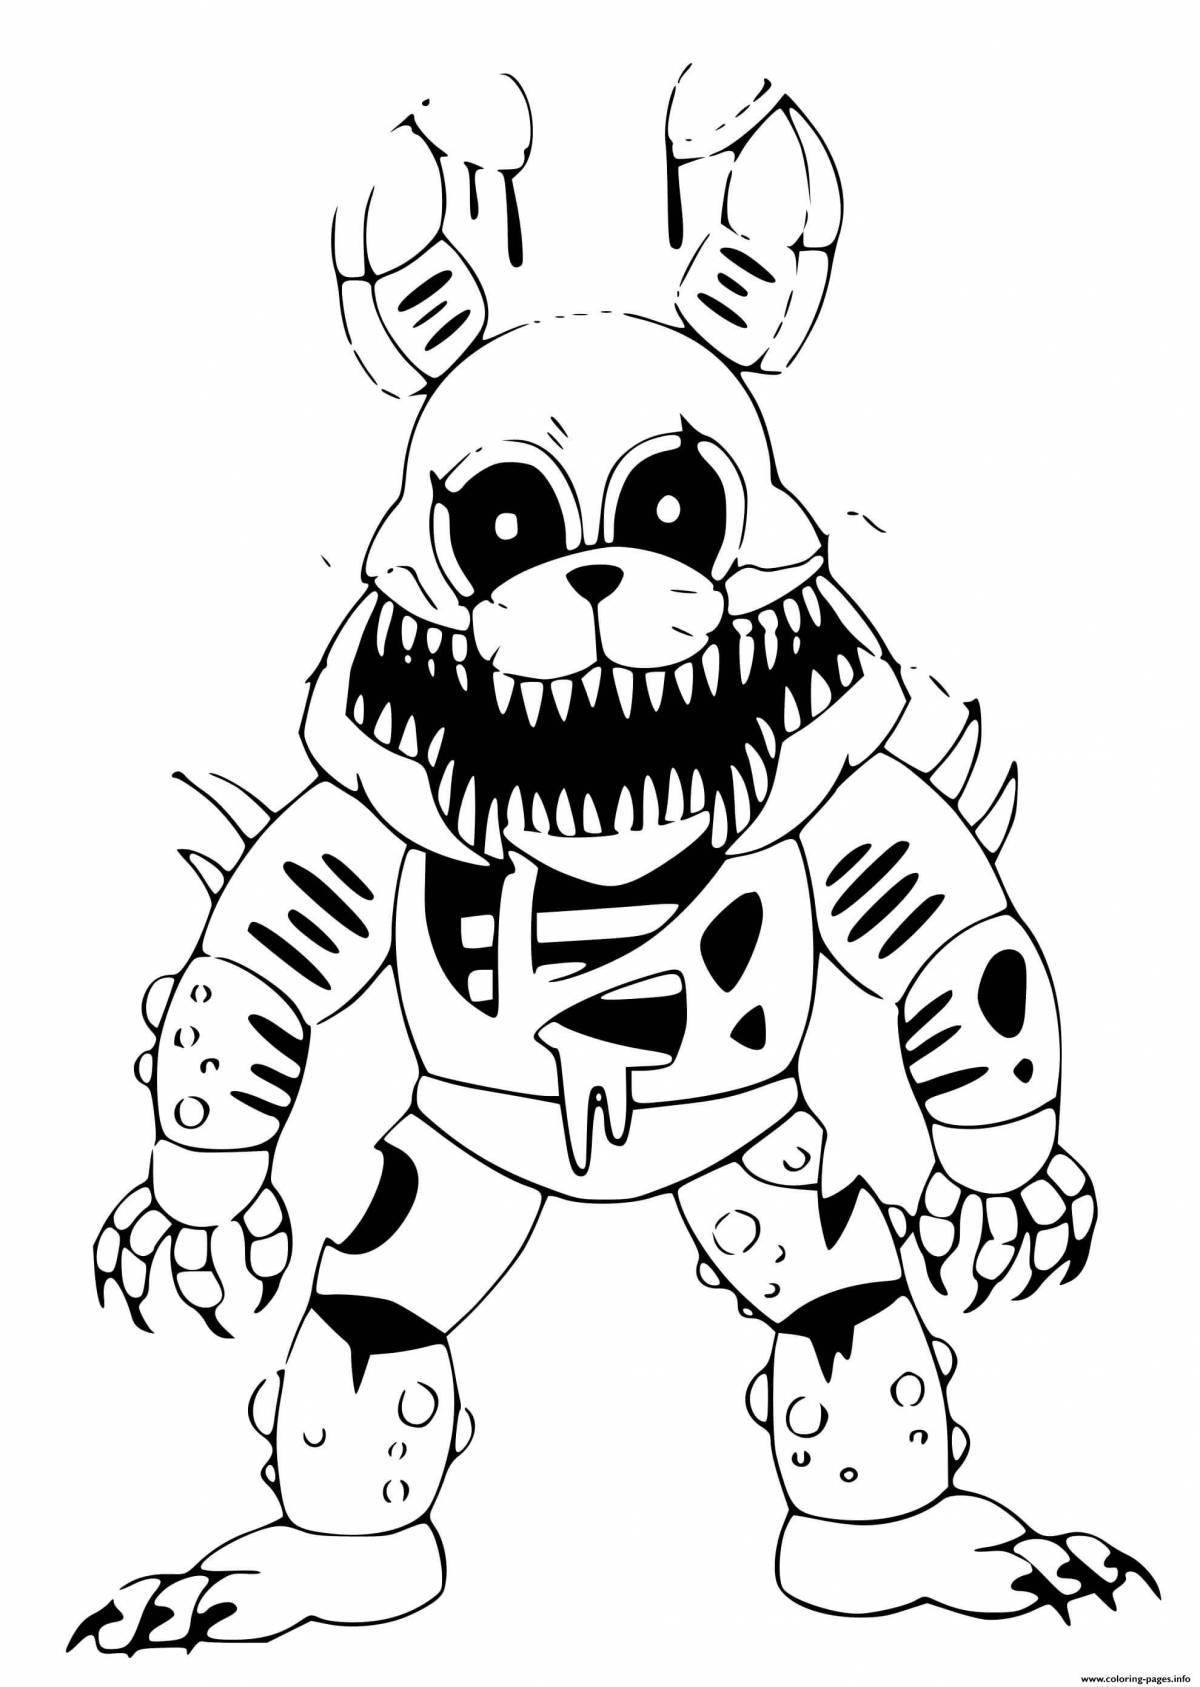 Bonnie's incredible animatronic coloring book